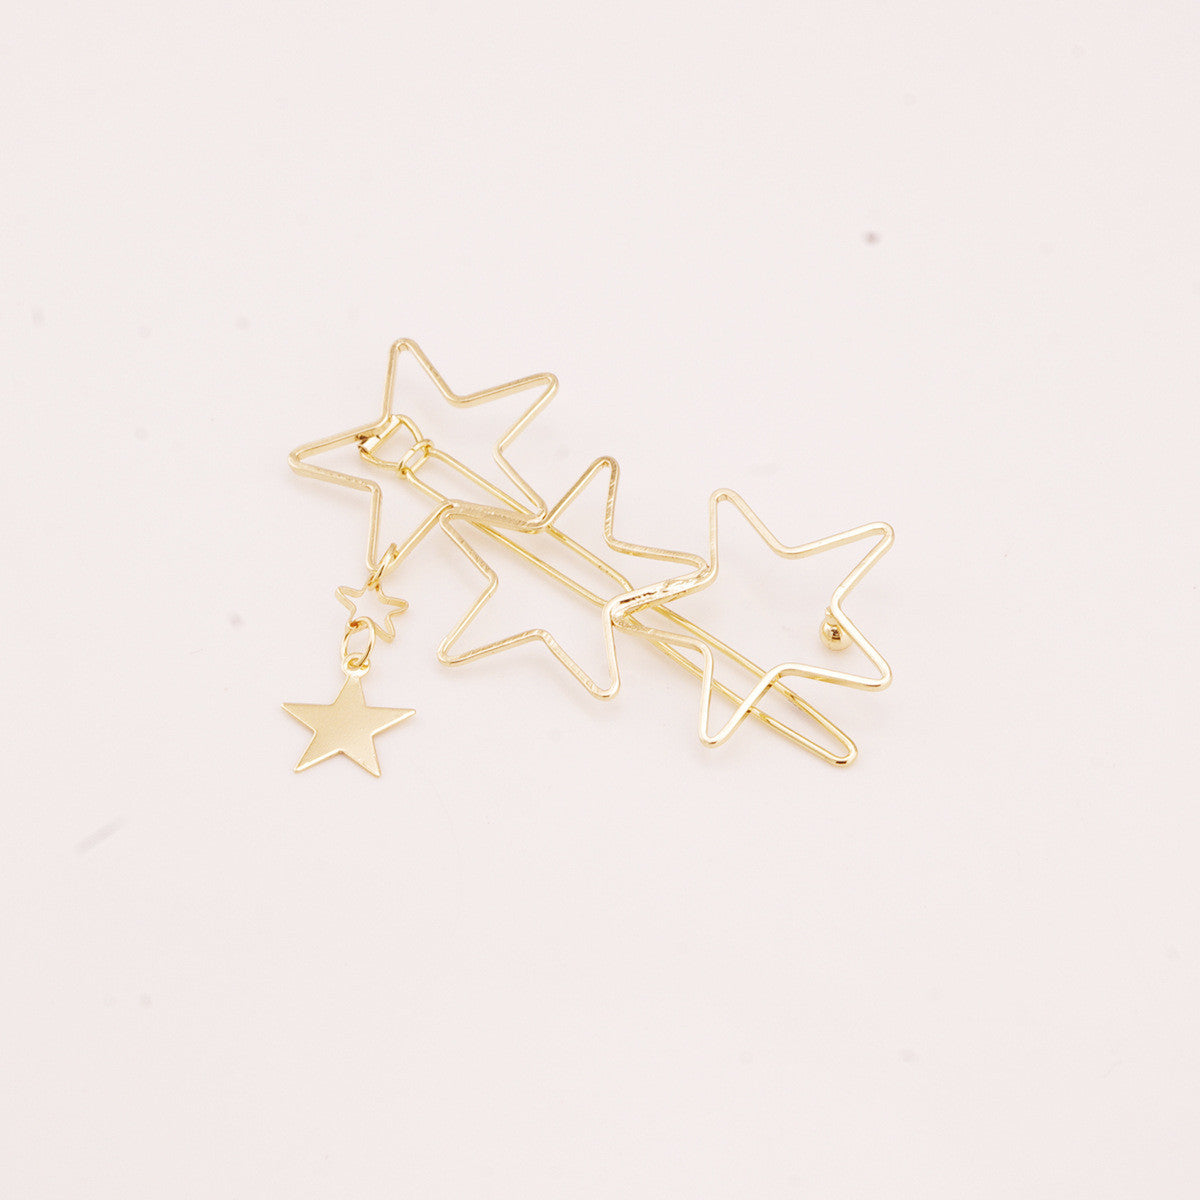 Beautiful Hollow Out Star Tassels Hairpin